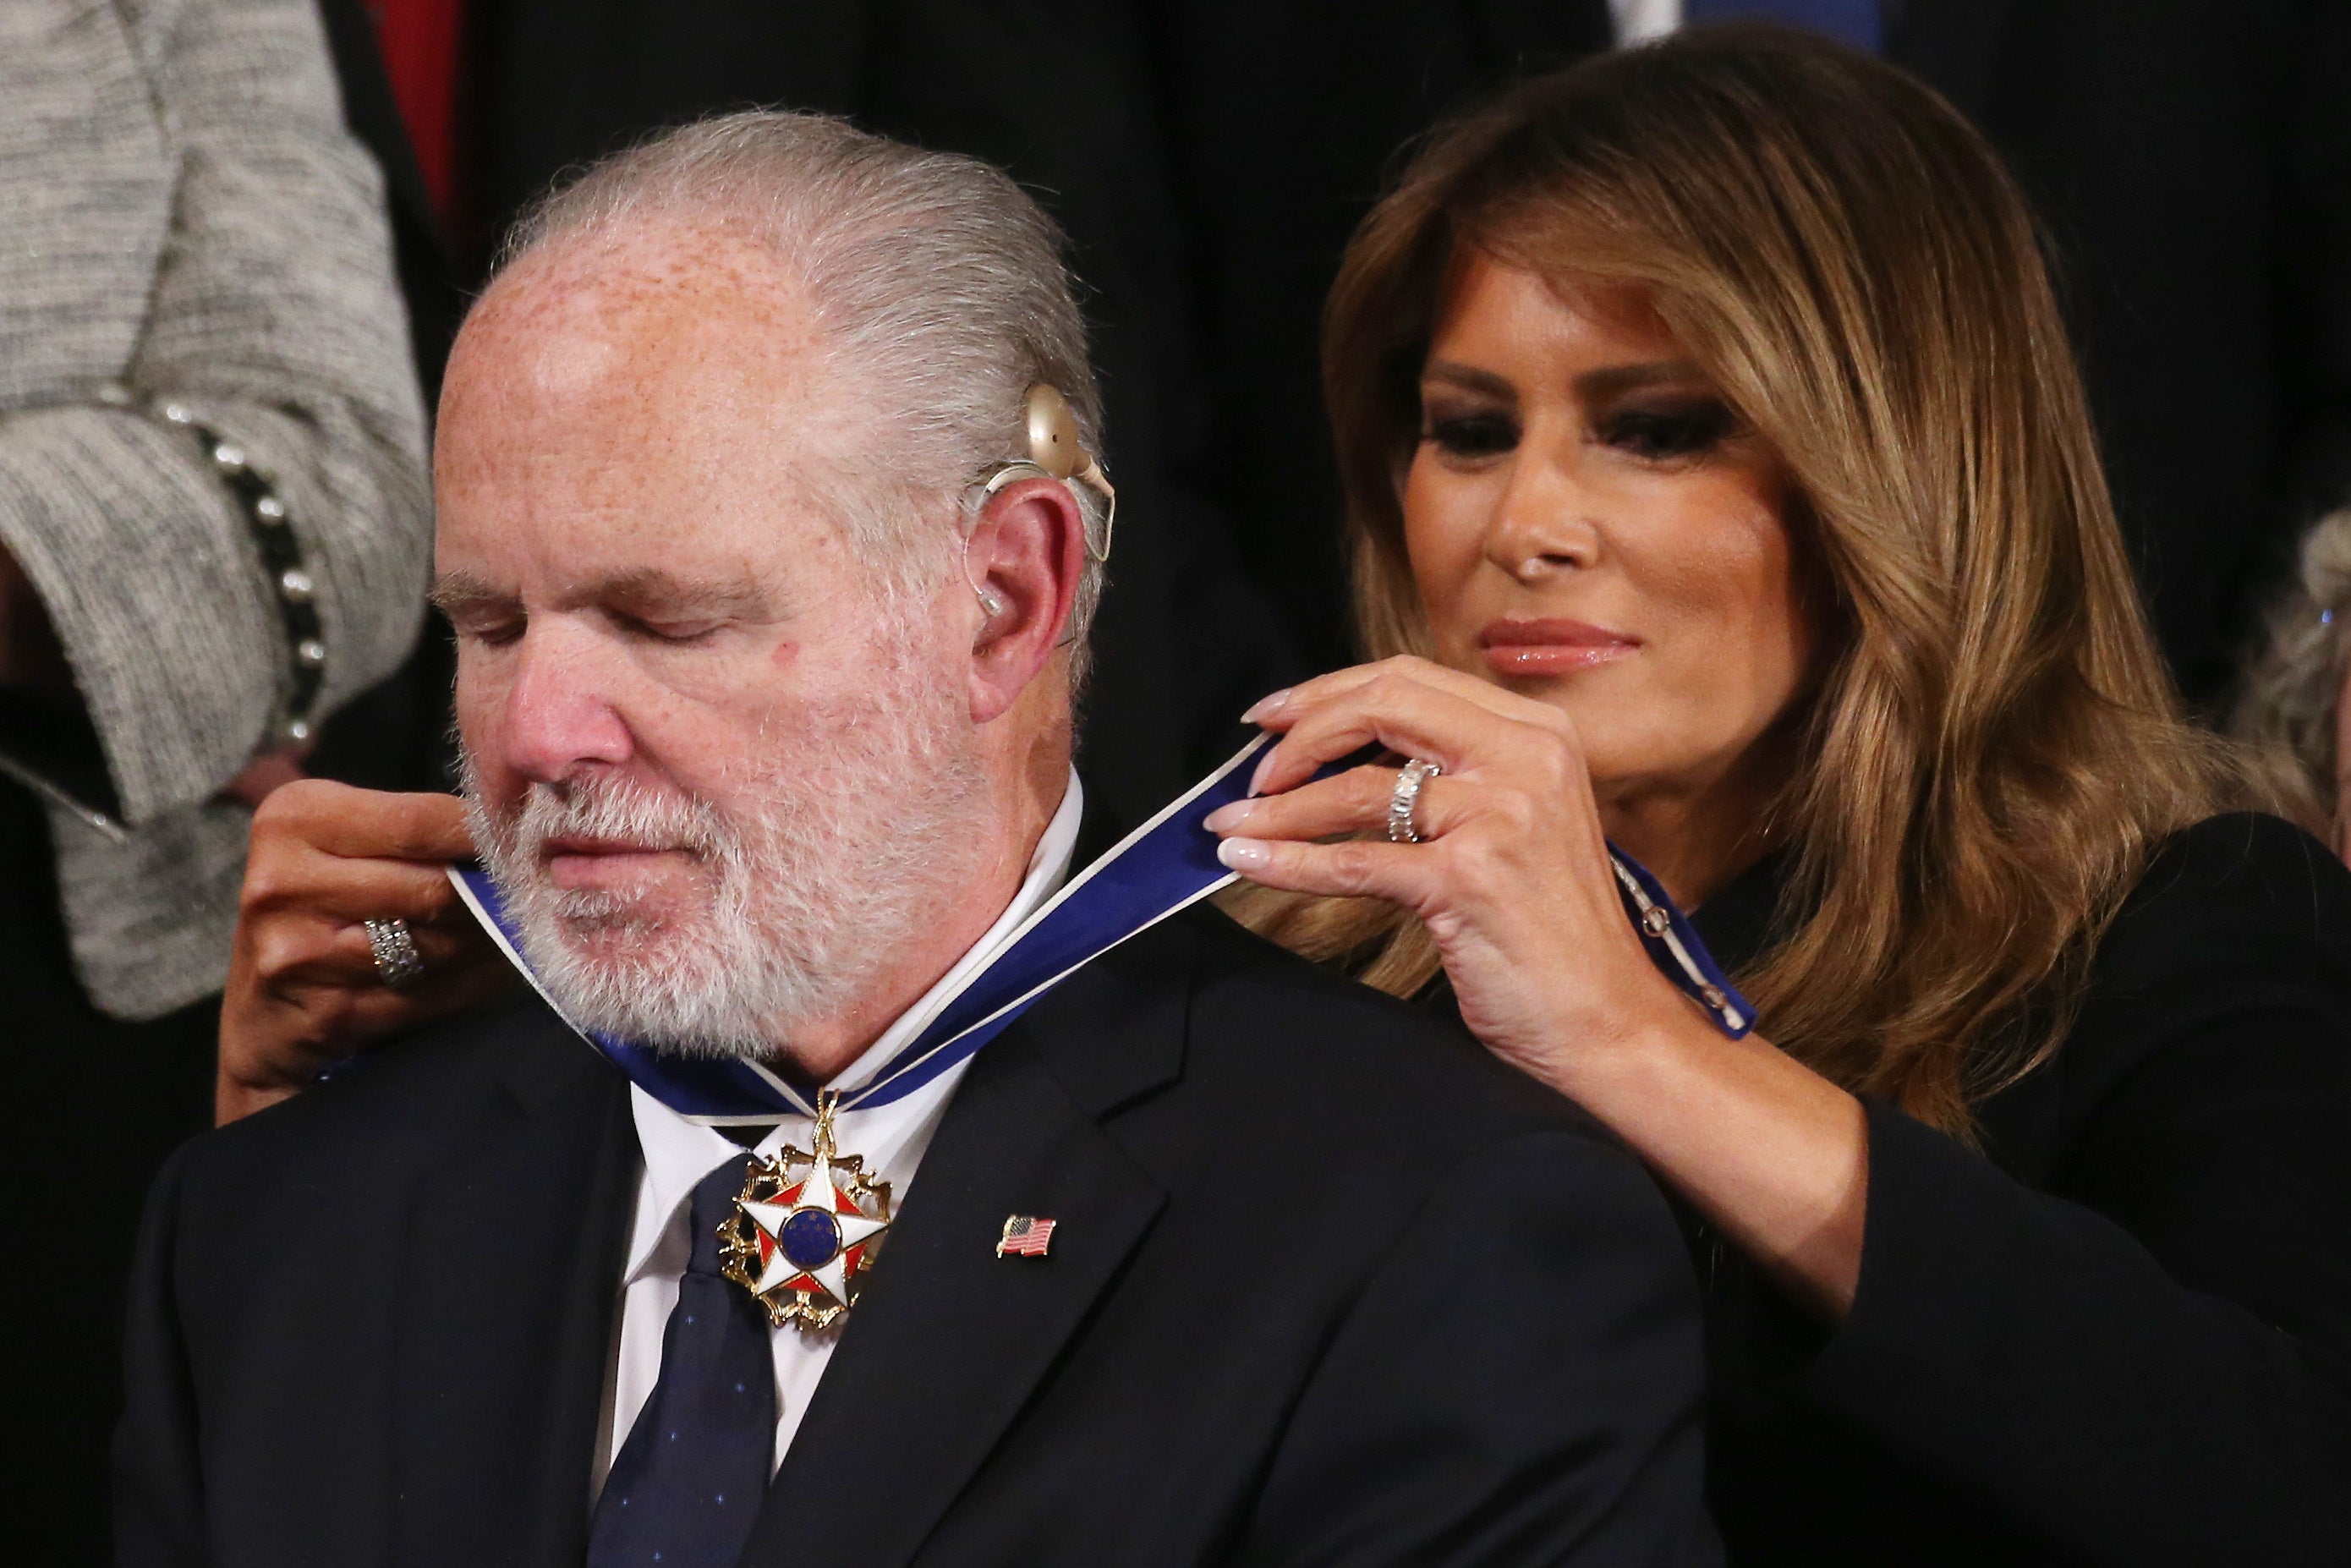 Radio personality Rush Limbaugh reacts as First Lady Melania Trump gives him the Presidential Medal of Freedom during the State of the Union address